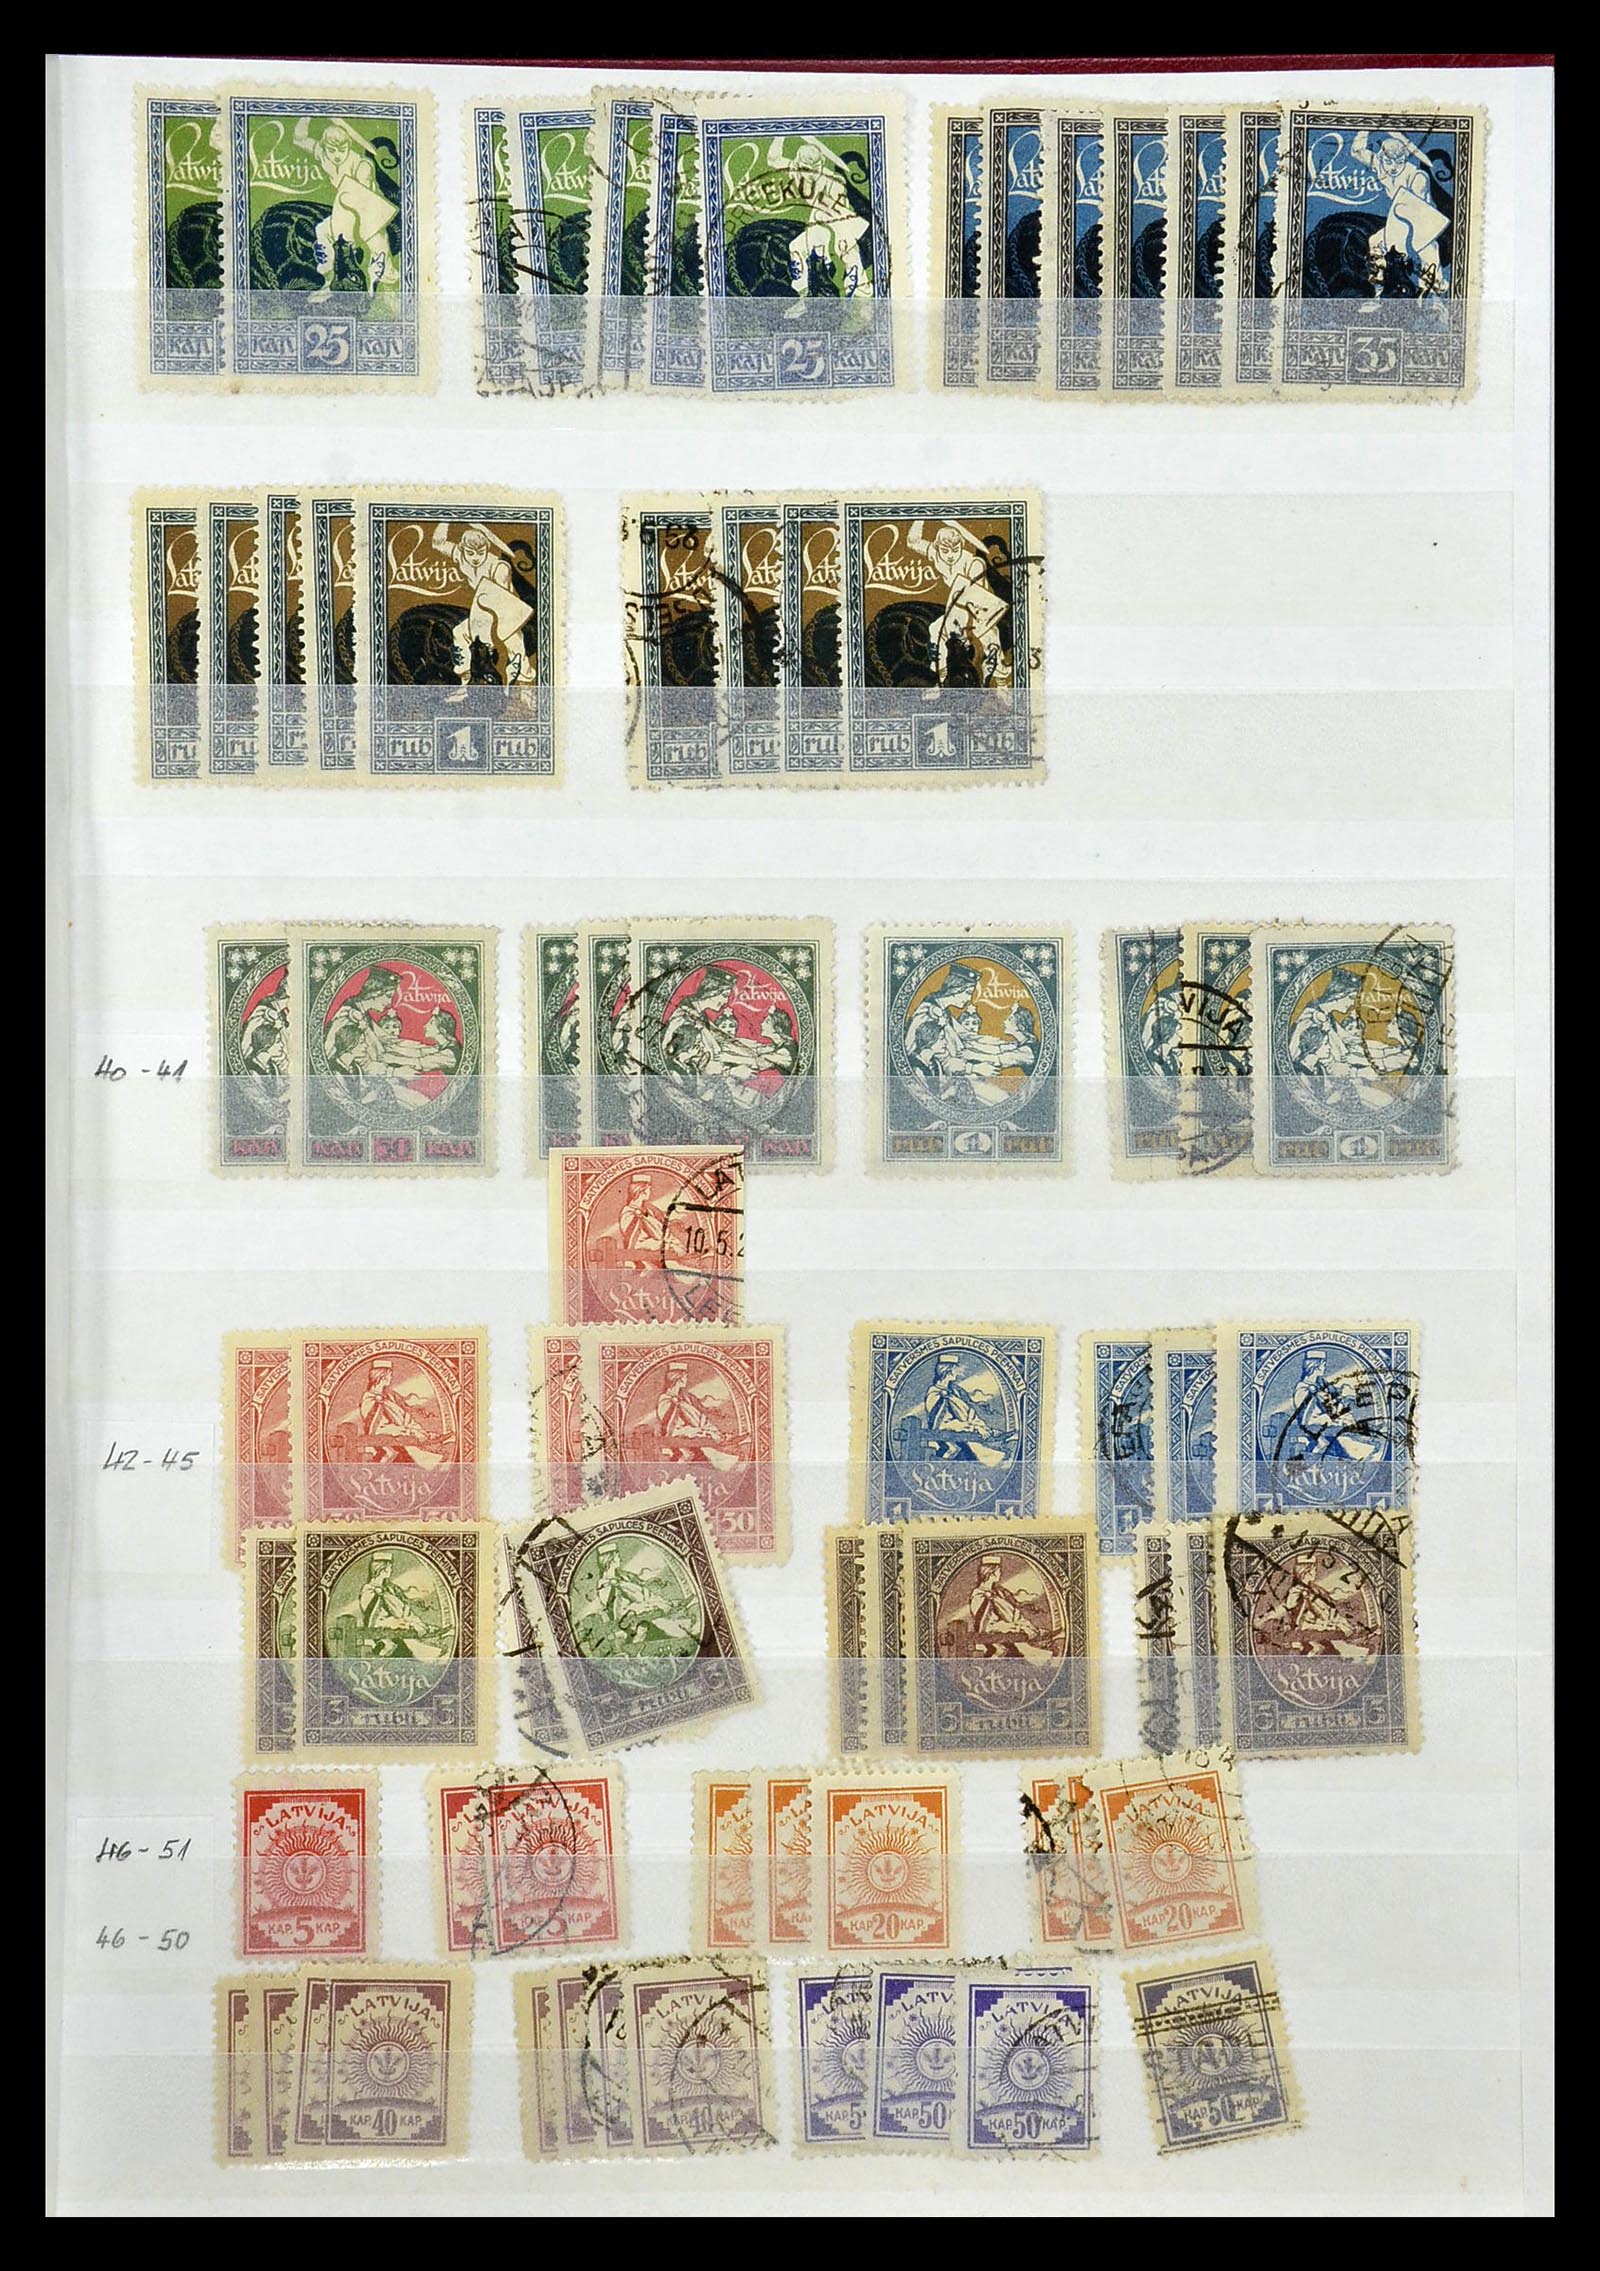 34203 075 - Stamp collection 34203 Europe new issues to 2010.